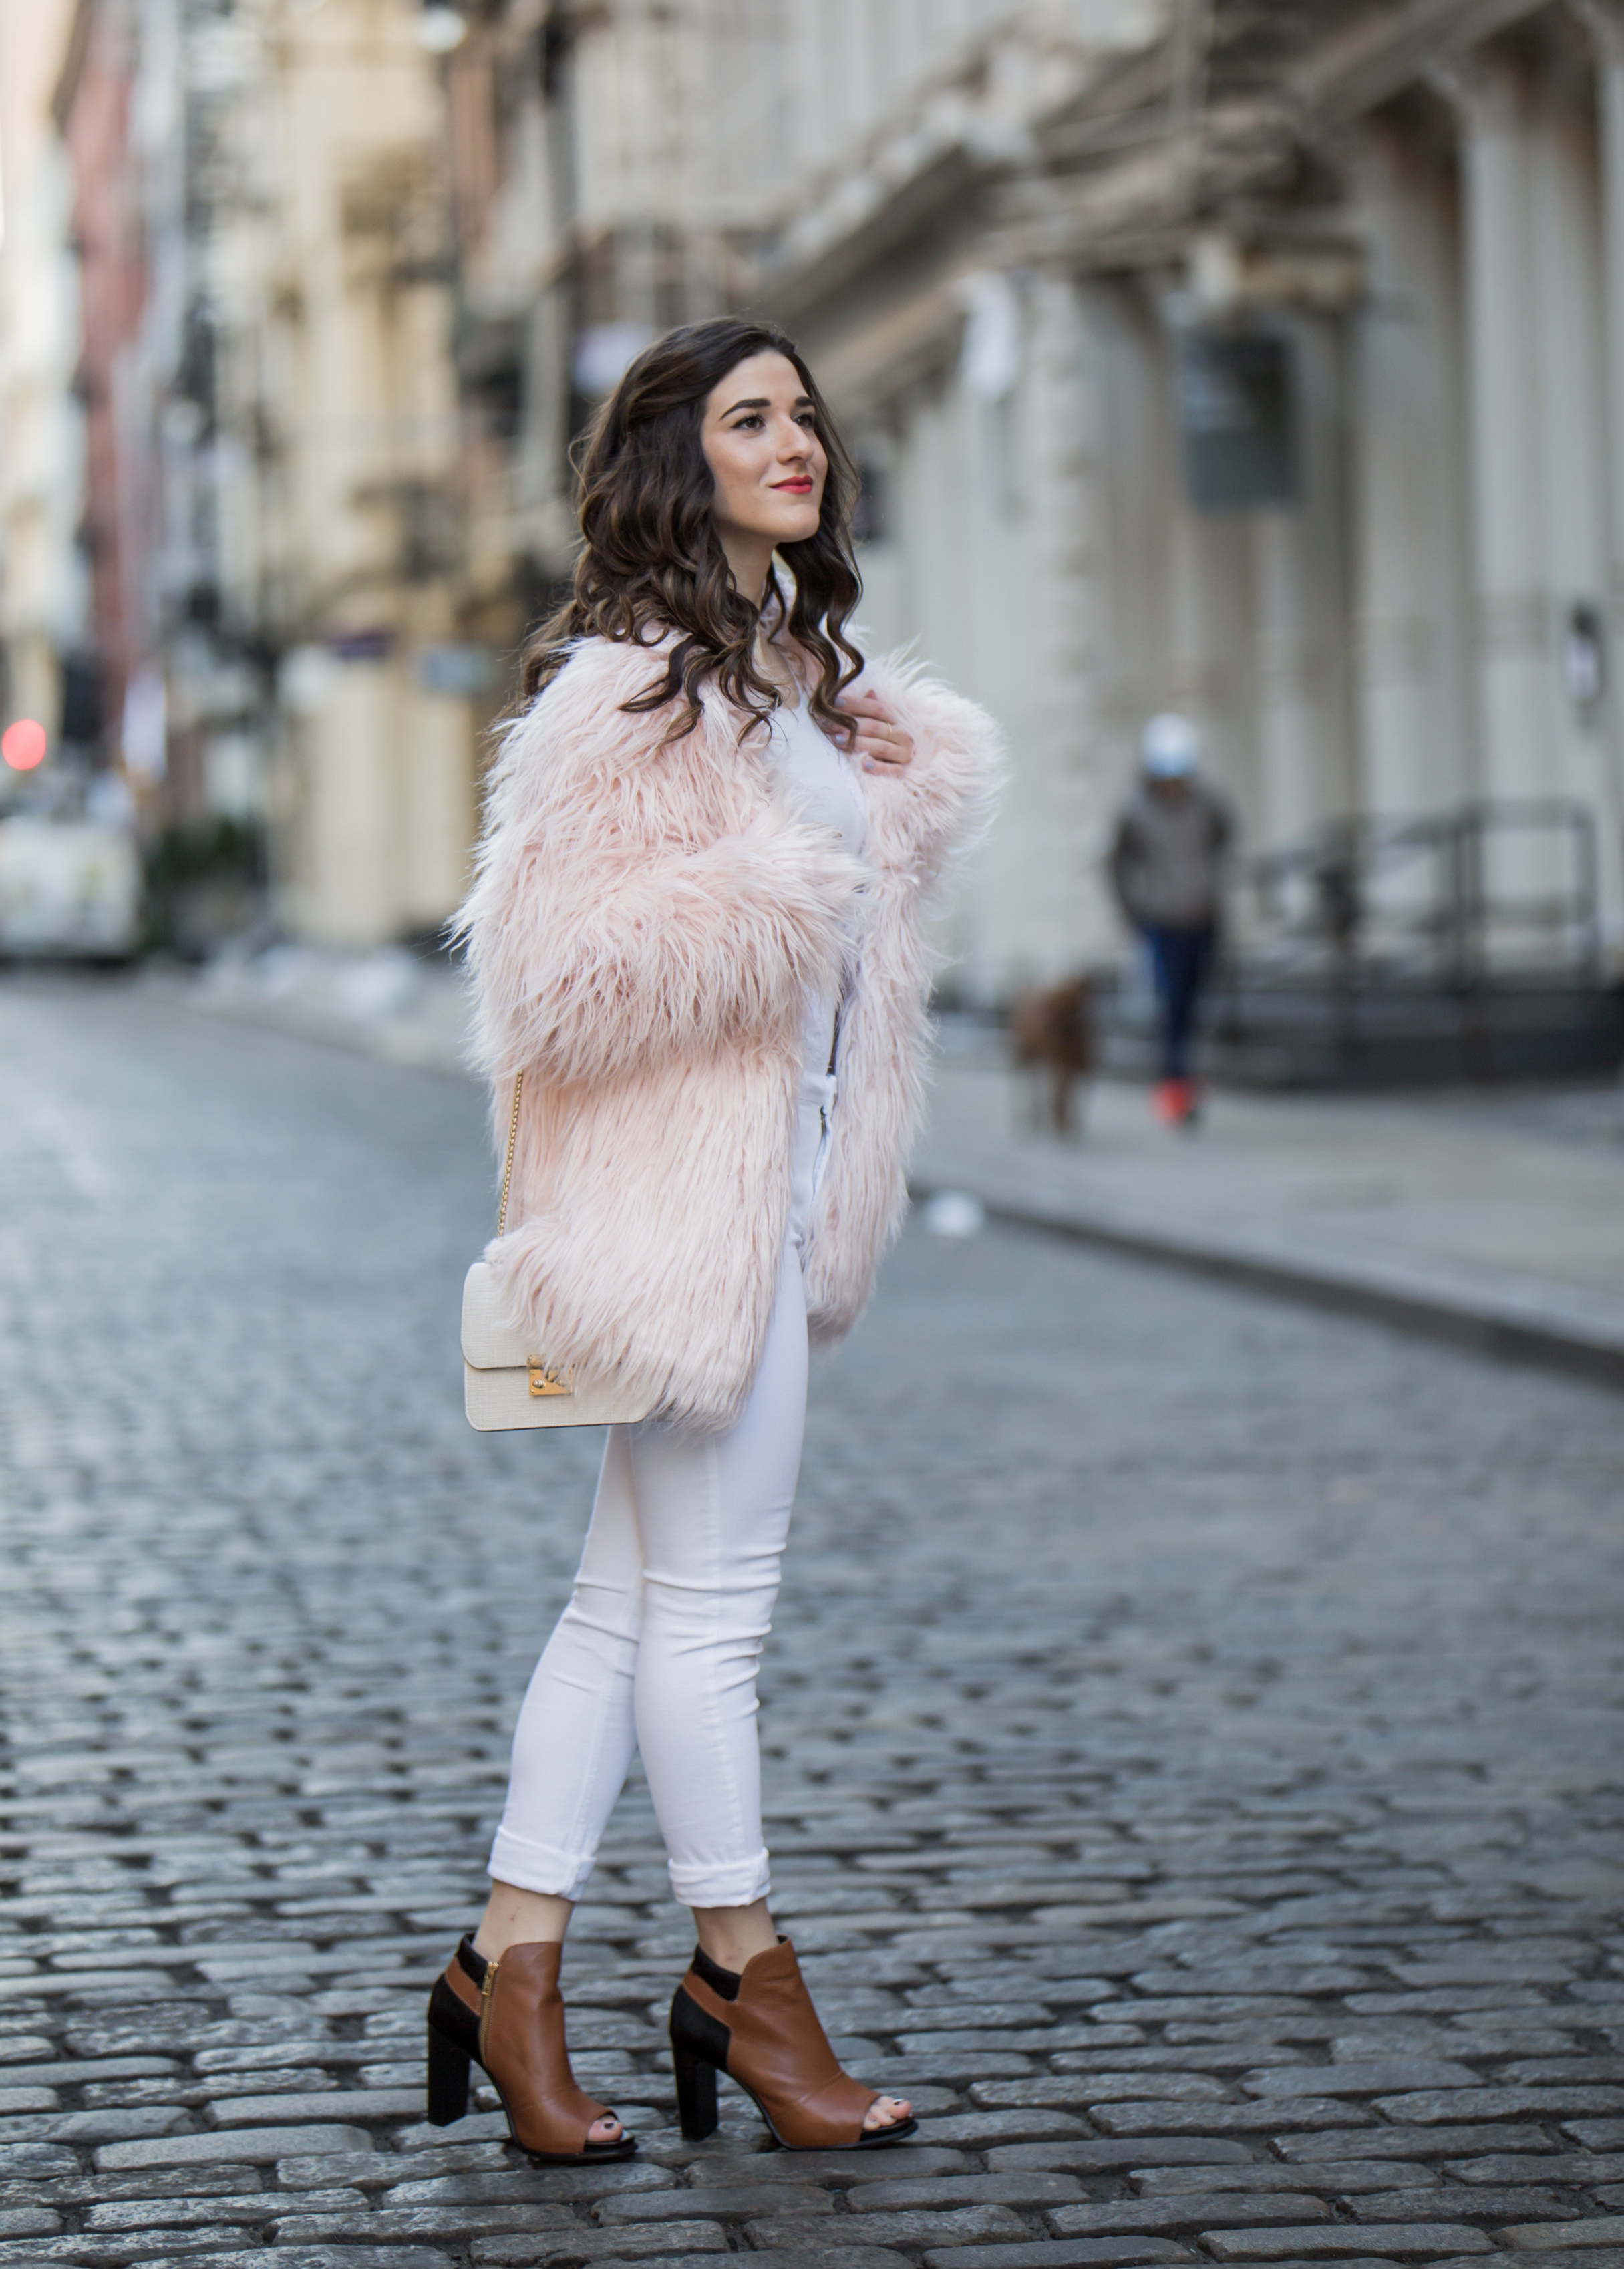 Pink Faux Fur Jacket White Jeans The Best Career Advice Esther Santer Fashion Blog NYC Street Style Blogger Outfit OOTD Trendy Winter Whites Henri Bendel Bag Tan Booties Girl Women Shop Sale Hair Shoes Wearing What To Wear Model Photoshoot Accessories.jpg